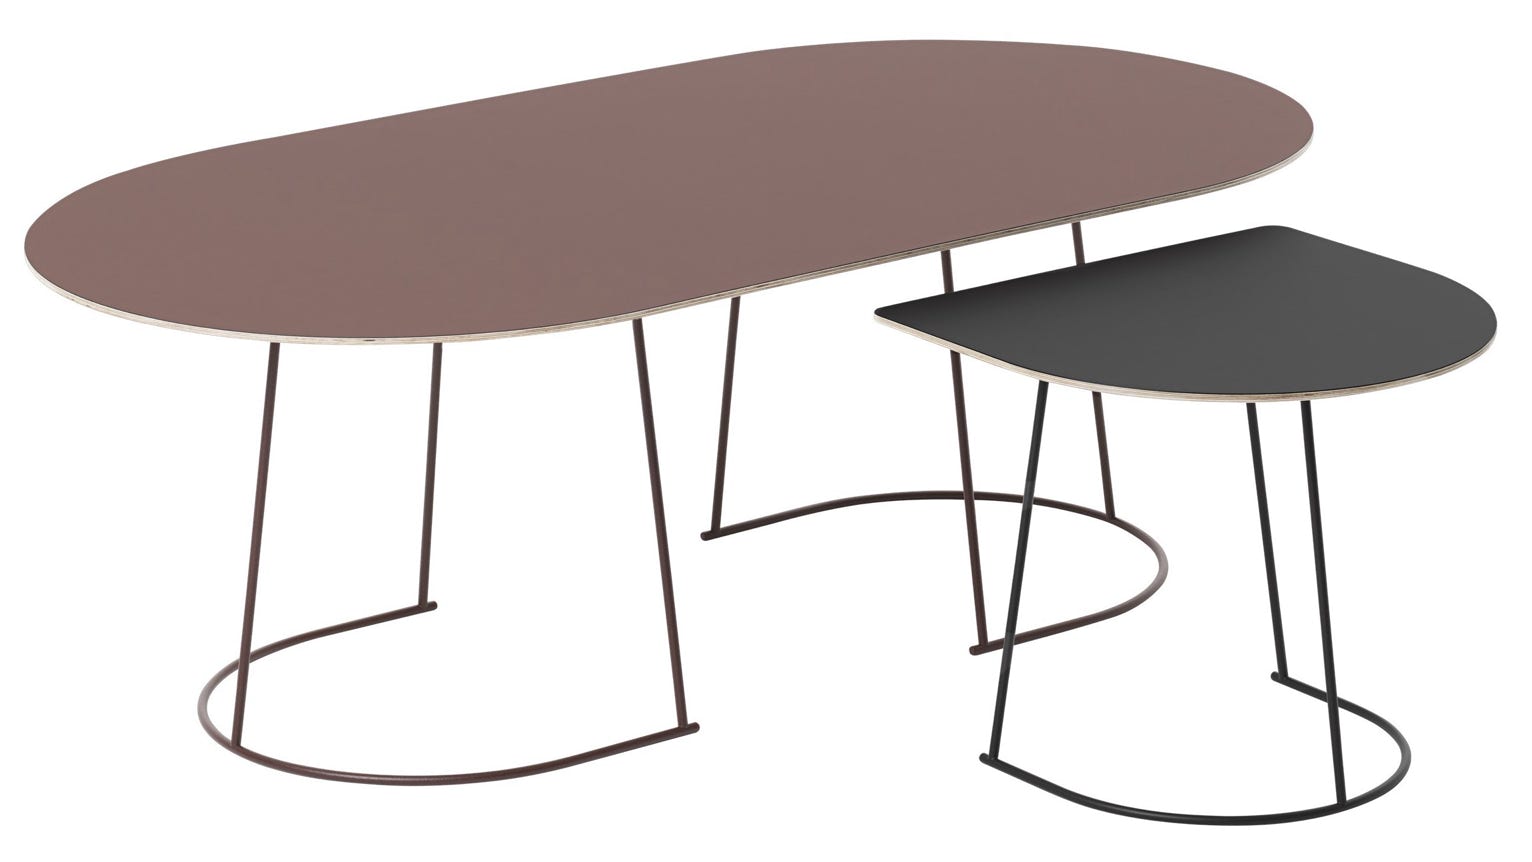 AIRY Side Tables Cecilie Manz, 2014